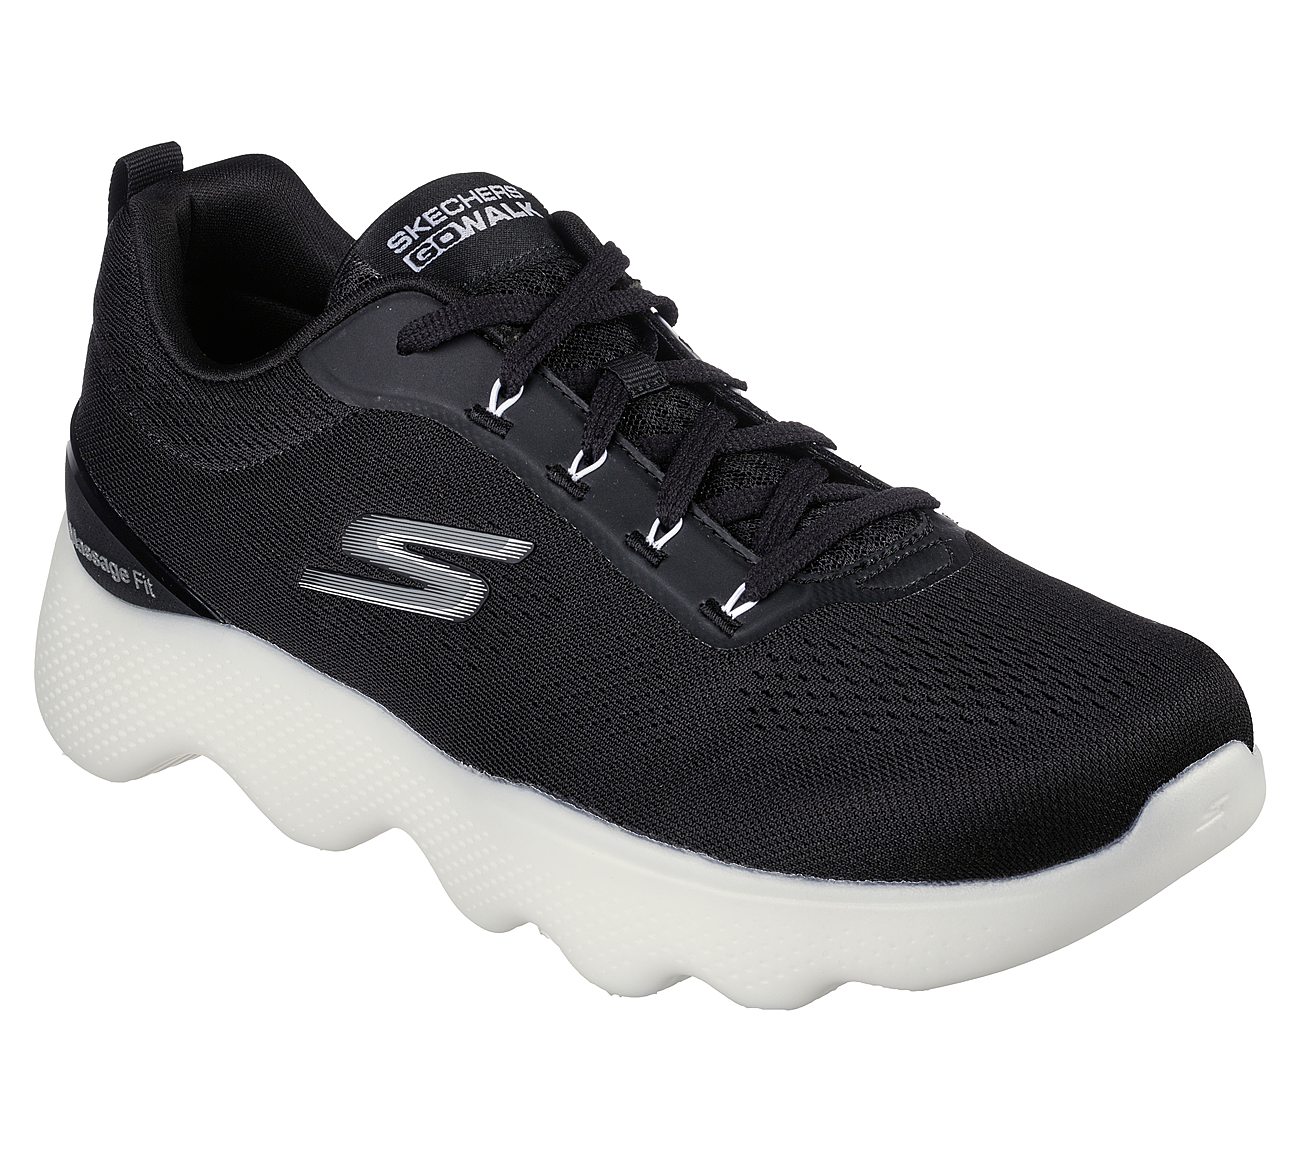 Skechers Black/White Go Walk Massage Fit Mens Lace Up Shoes - Style ID ...